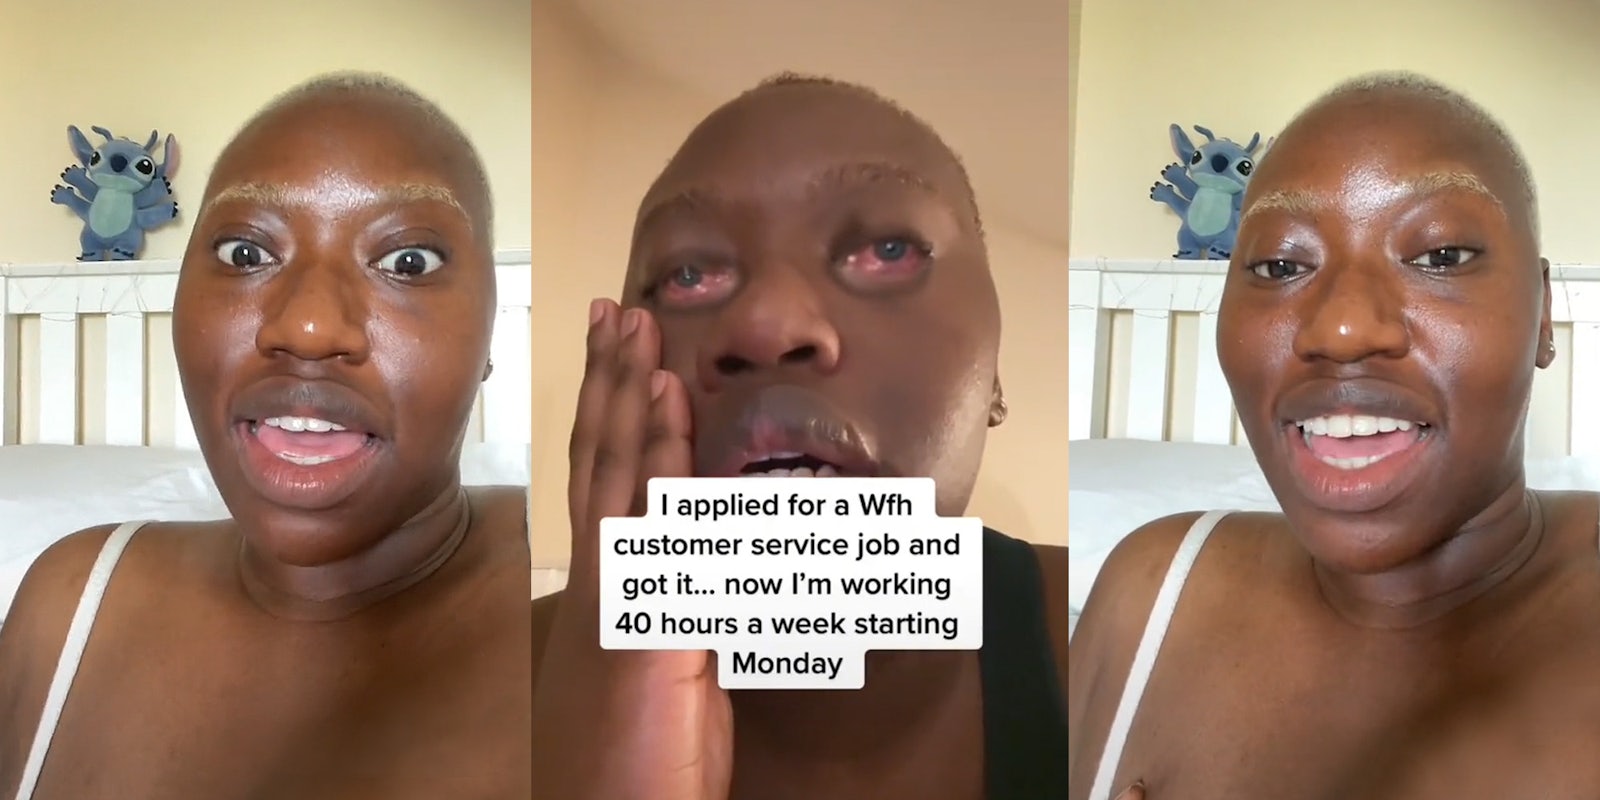 woman speaking (l) woman hand on cheek crying filter on eyes caption 'I applied for a Wfh customer service job ans got it... now I'm working 40 hours a week starting Monday' (c) woman speaking (r)